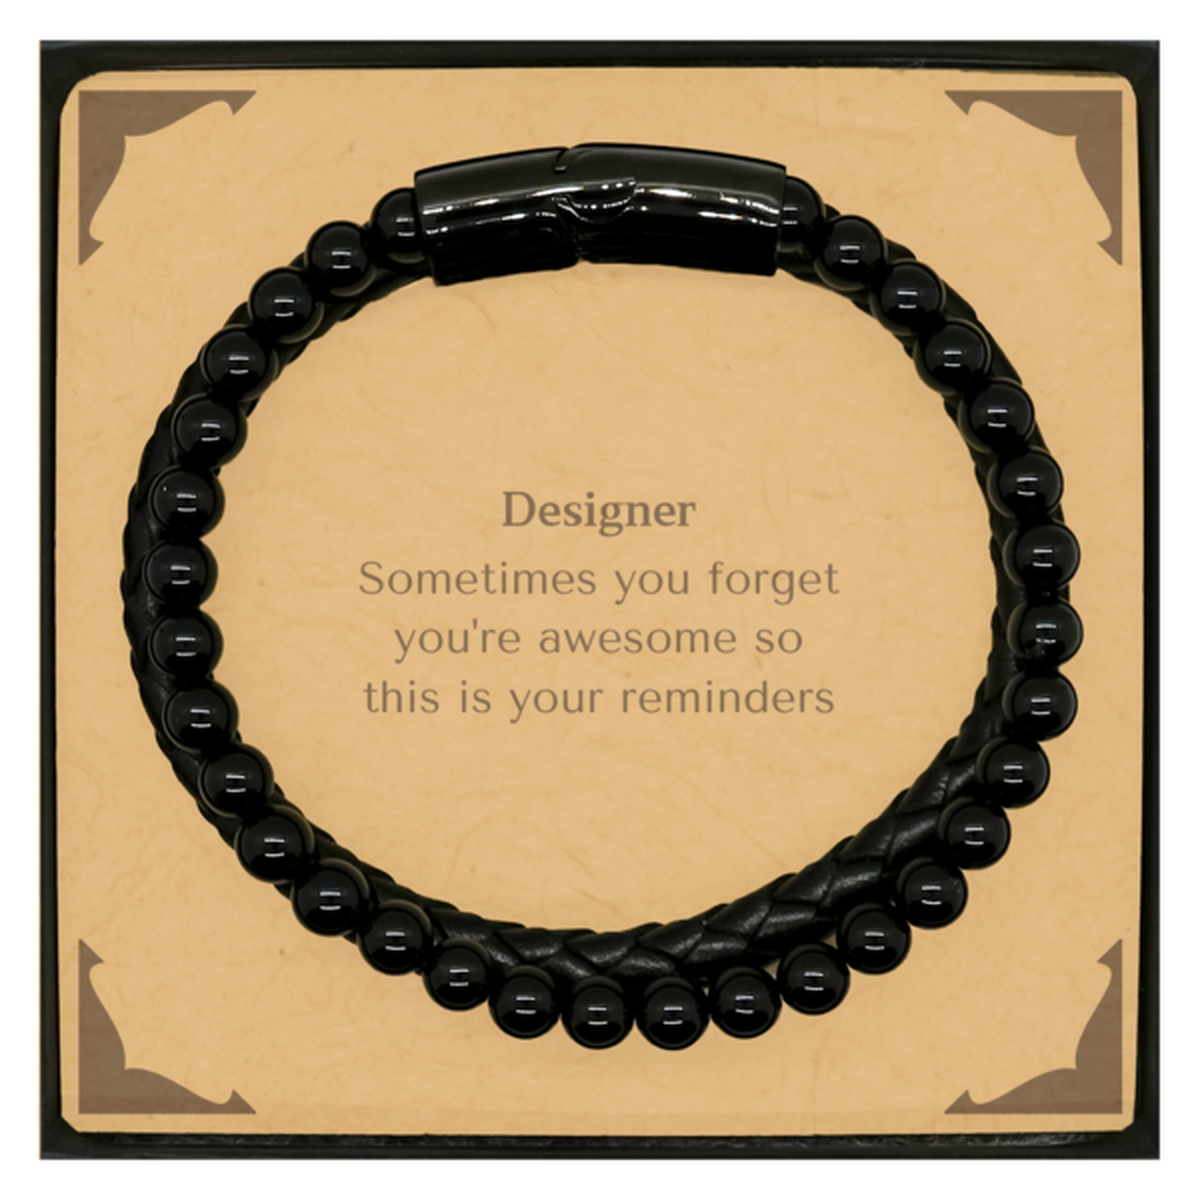 Sentimental Designer Stone Leather Bracelets, Designer Sometimes you forget you're awesome so this is your reminders, Graduation Christmas Birthday Gifts for Designer, Men, Women, Coworkers